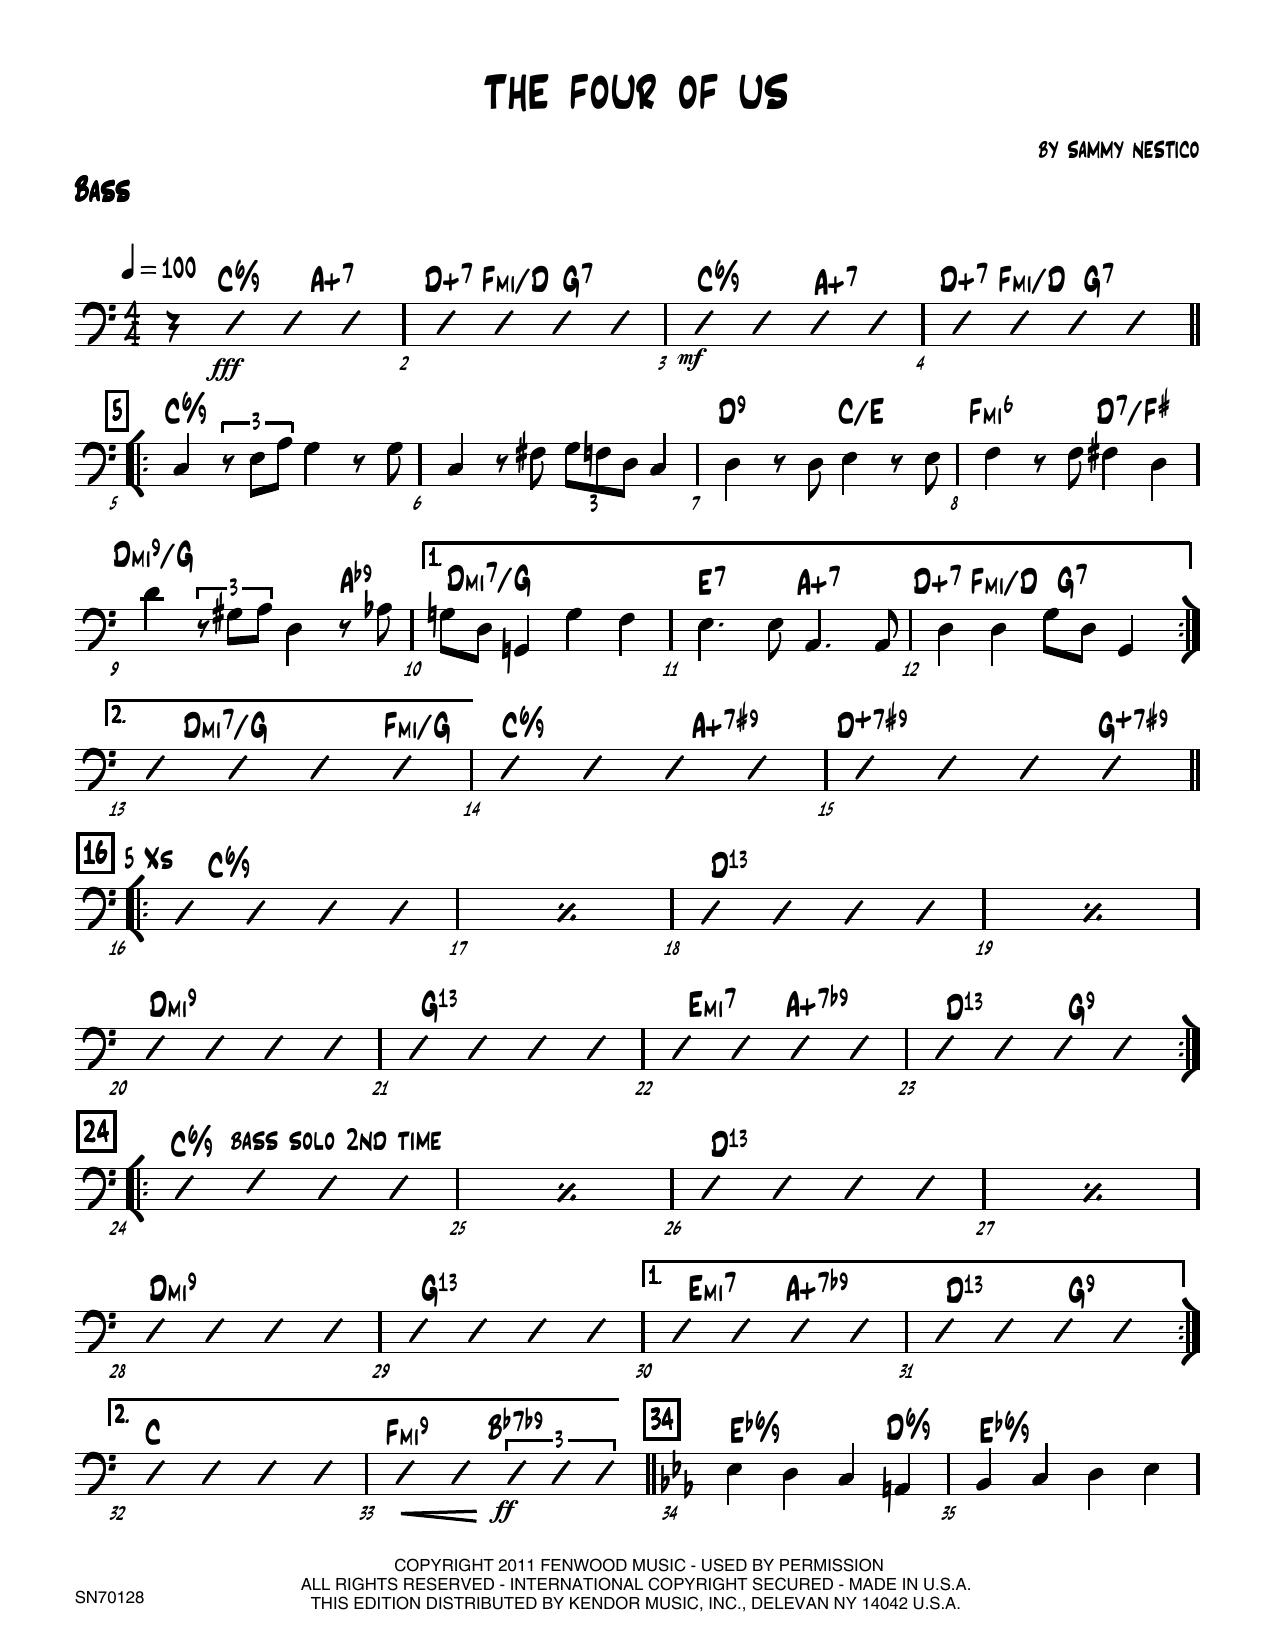 Download Sammy Nestico The Four Of Us - Bass Sheet Music